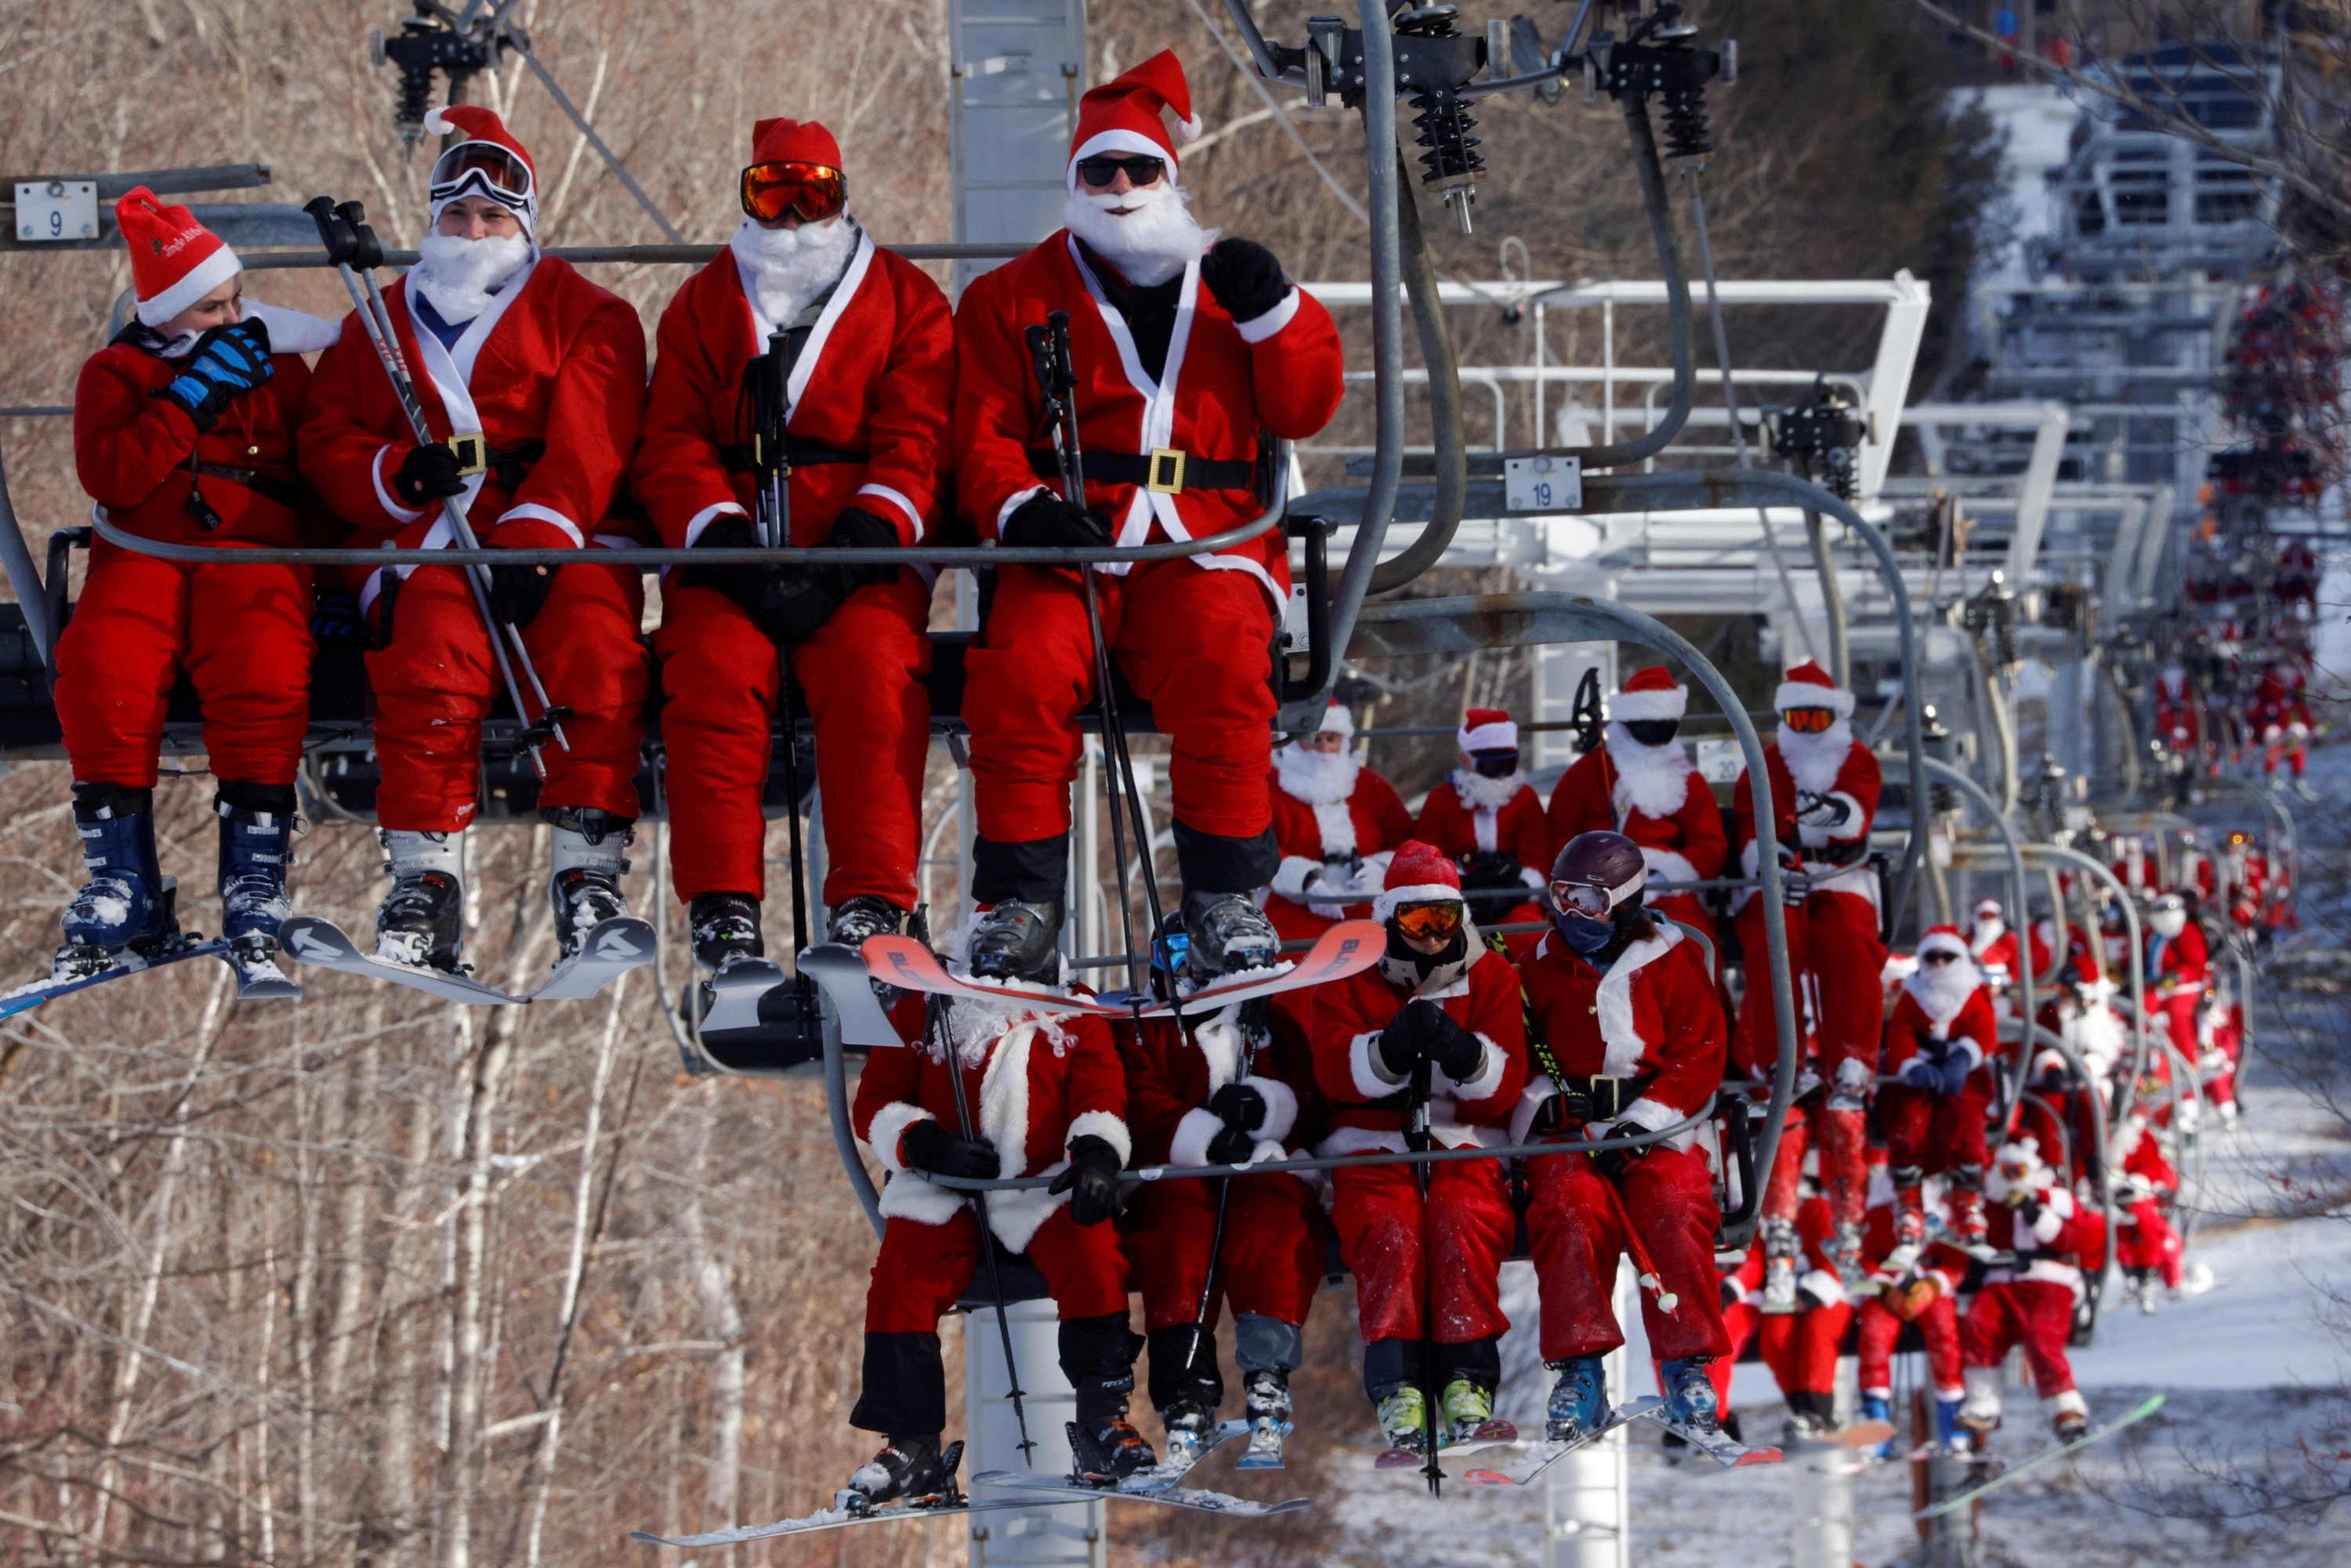 Skiers dressed as Santa Claus ride the lifts to participate in the charity Santa Sunday at Sunday River ski resort in Bethel, Maine, U.S., Dec. 5, 2021. (Reuters Photo)